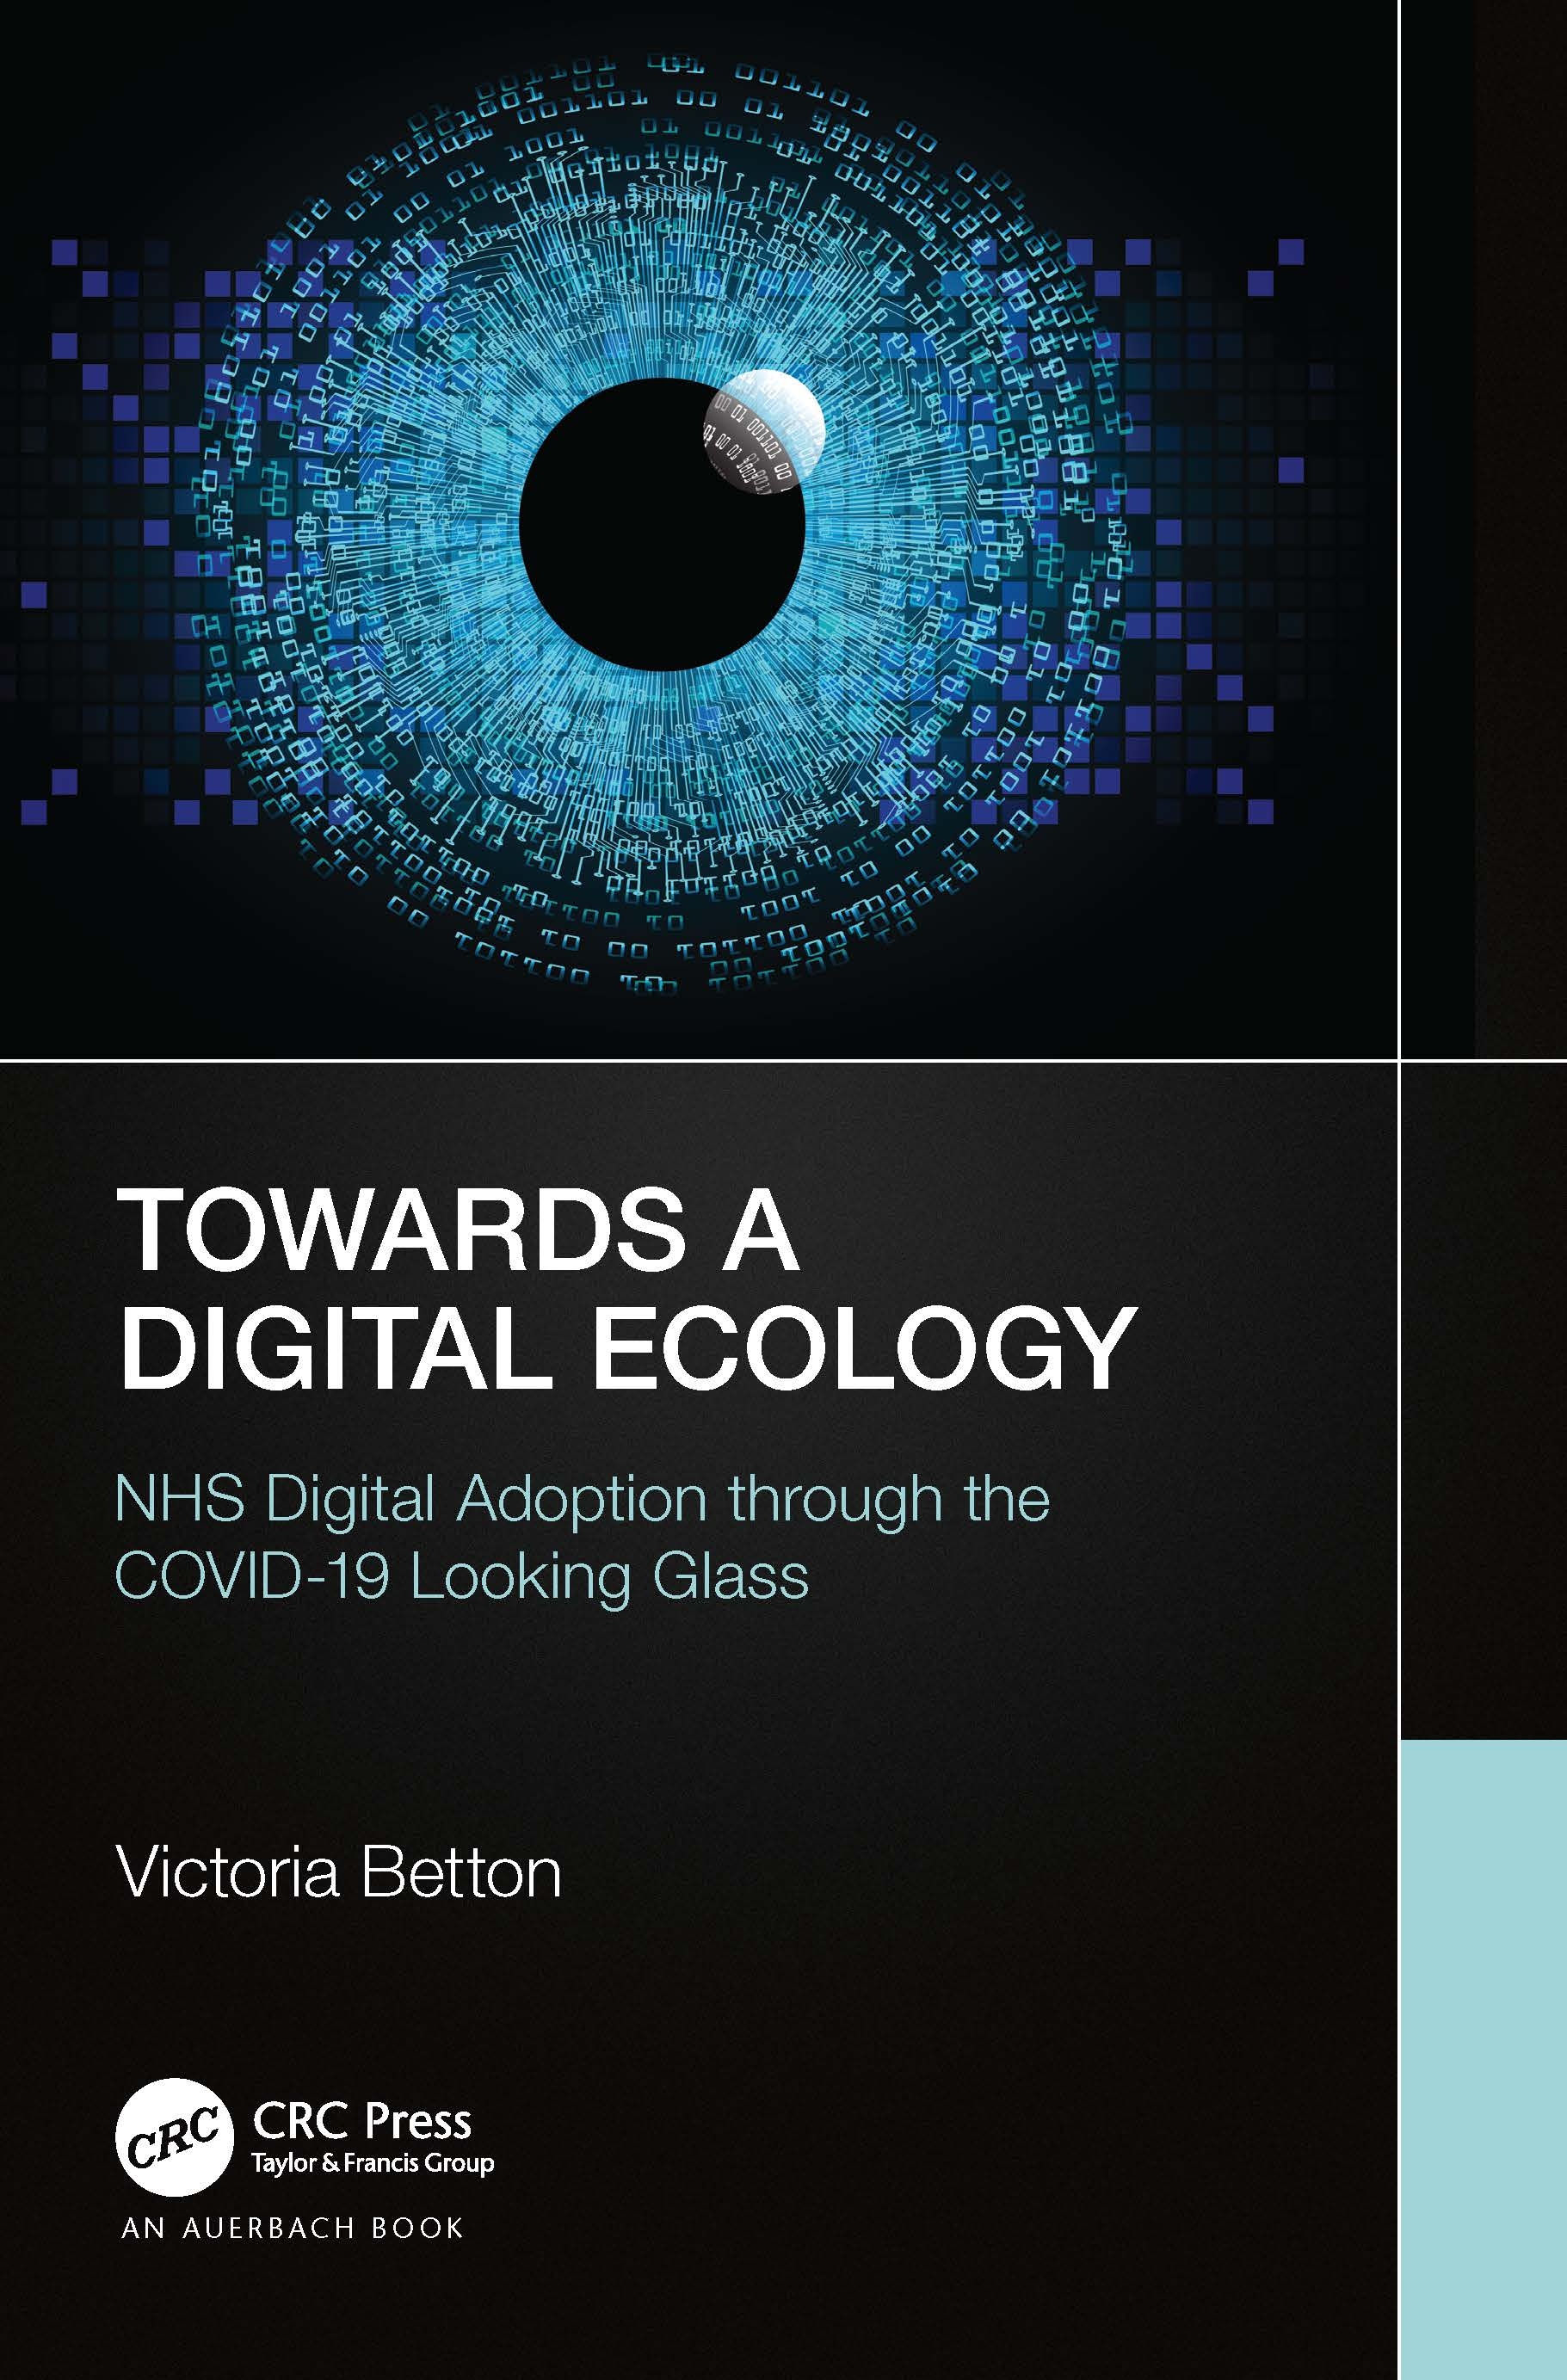 Towards a Digital Health Ecology at the Nhs: Healthcare Technology Adoption Through the Covid-19 Looking Glass